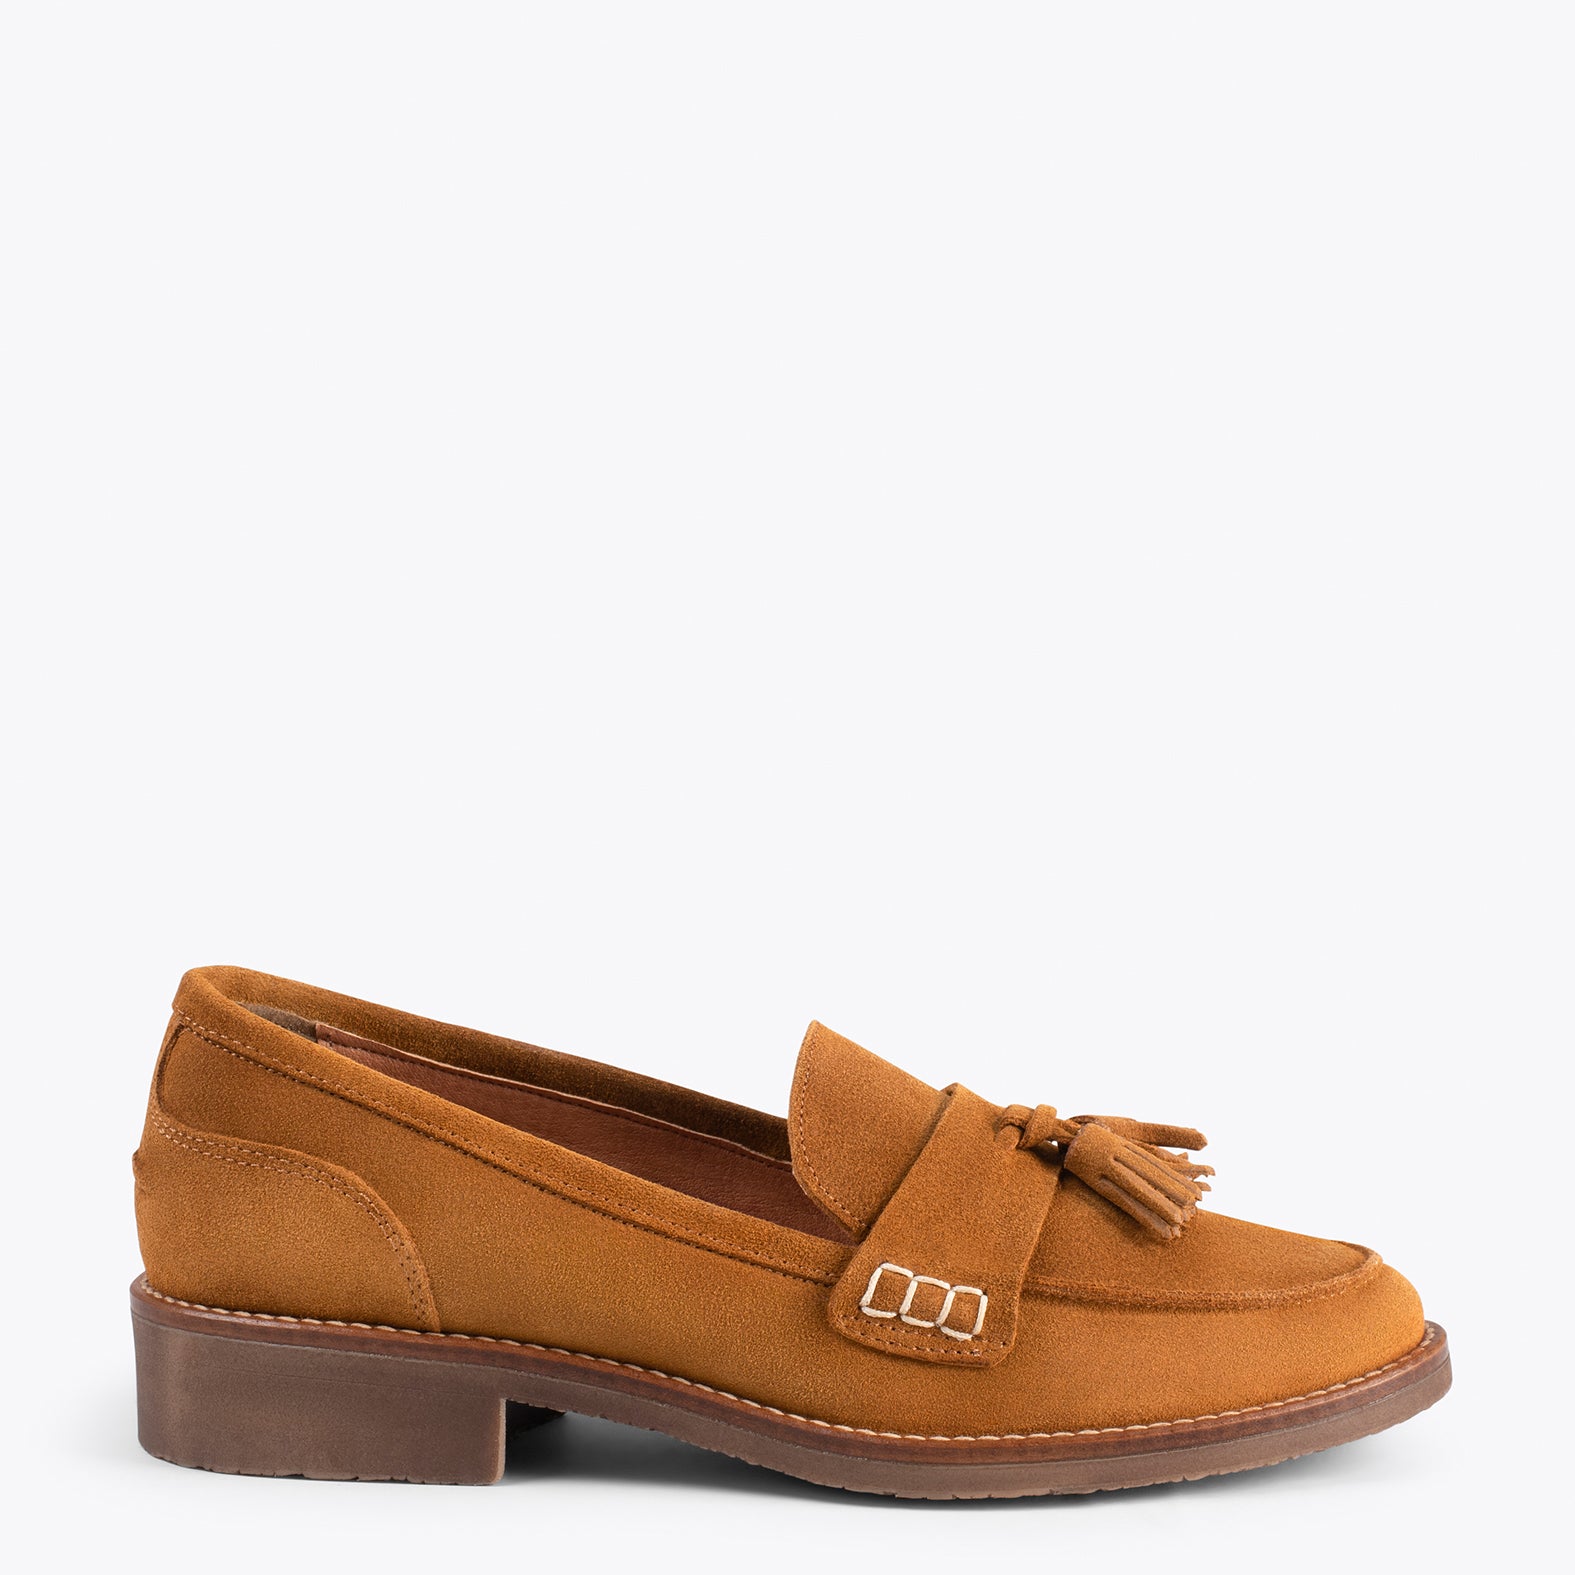 CASTELLANO – CAMEL moccasin with tassel